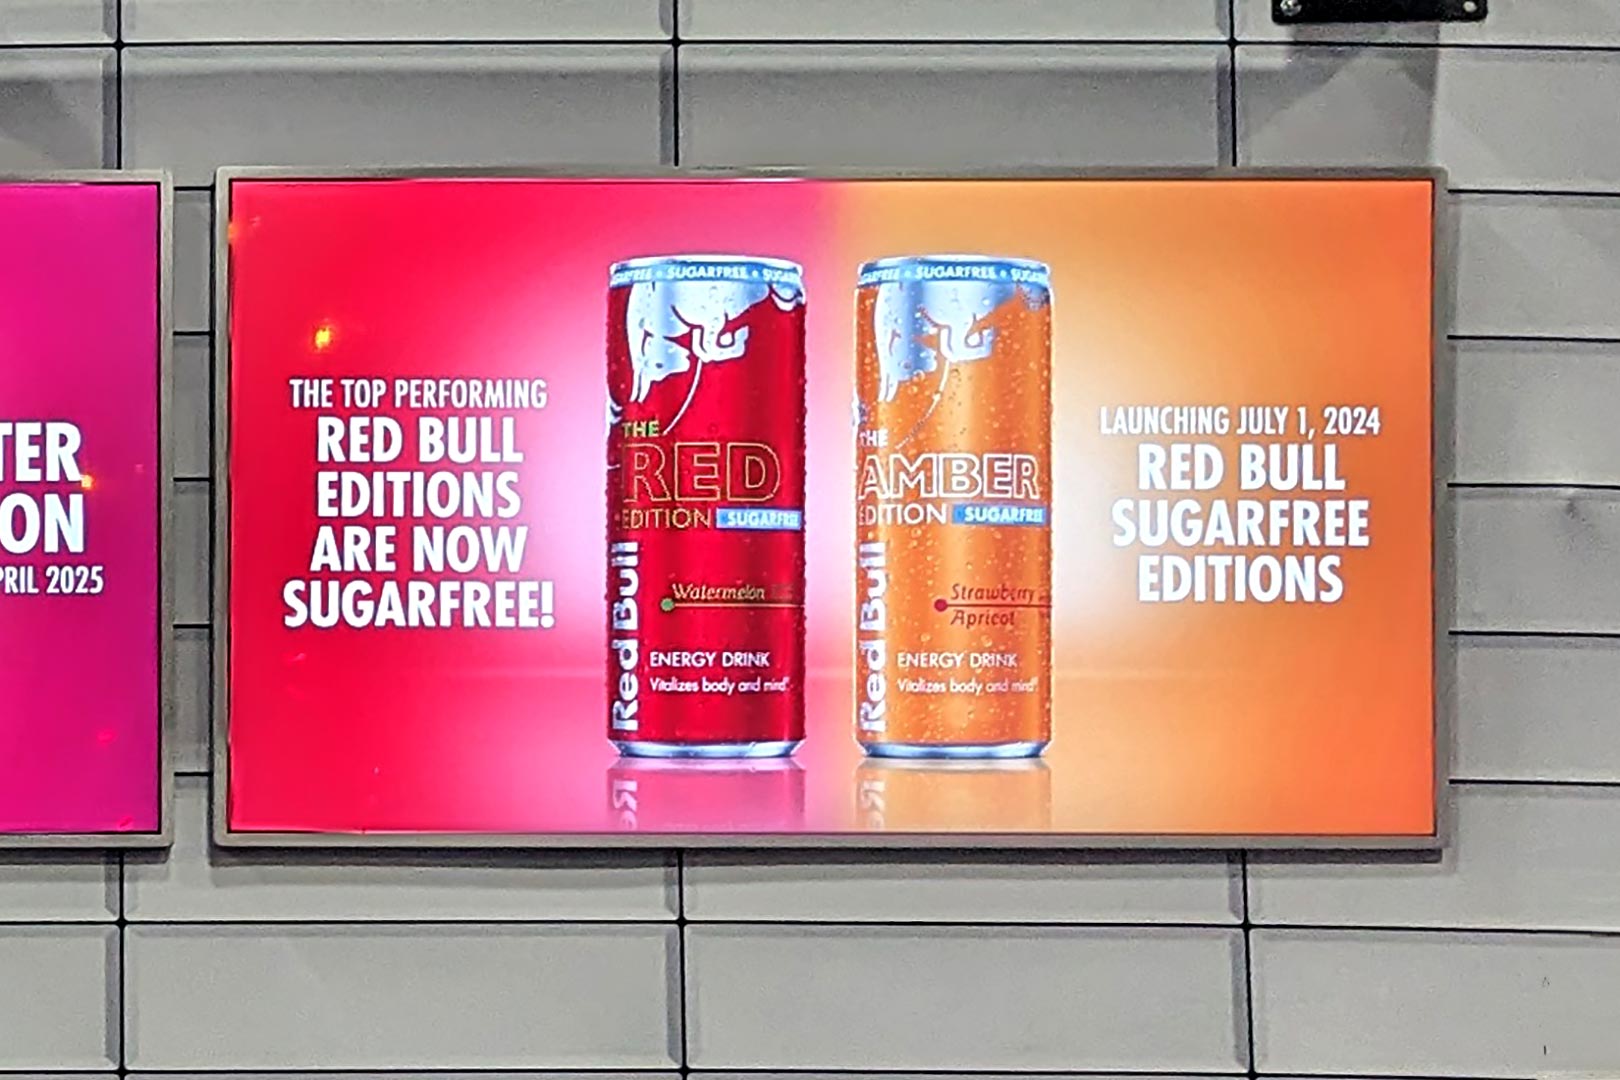 Red Bull Sugar Free Red Edition And Amber Edition